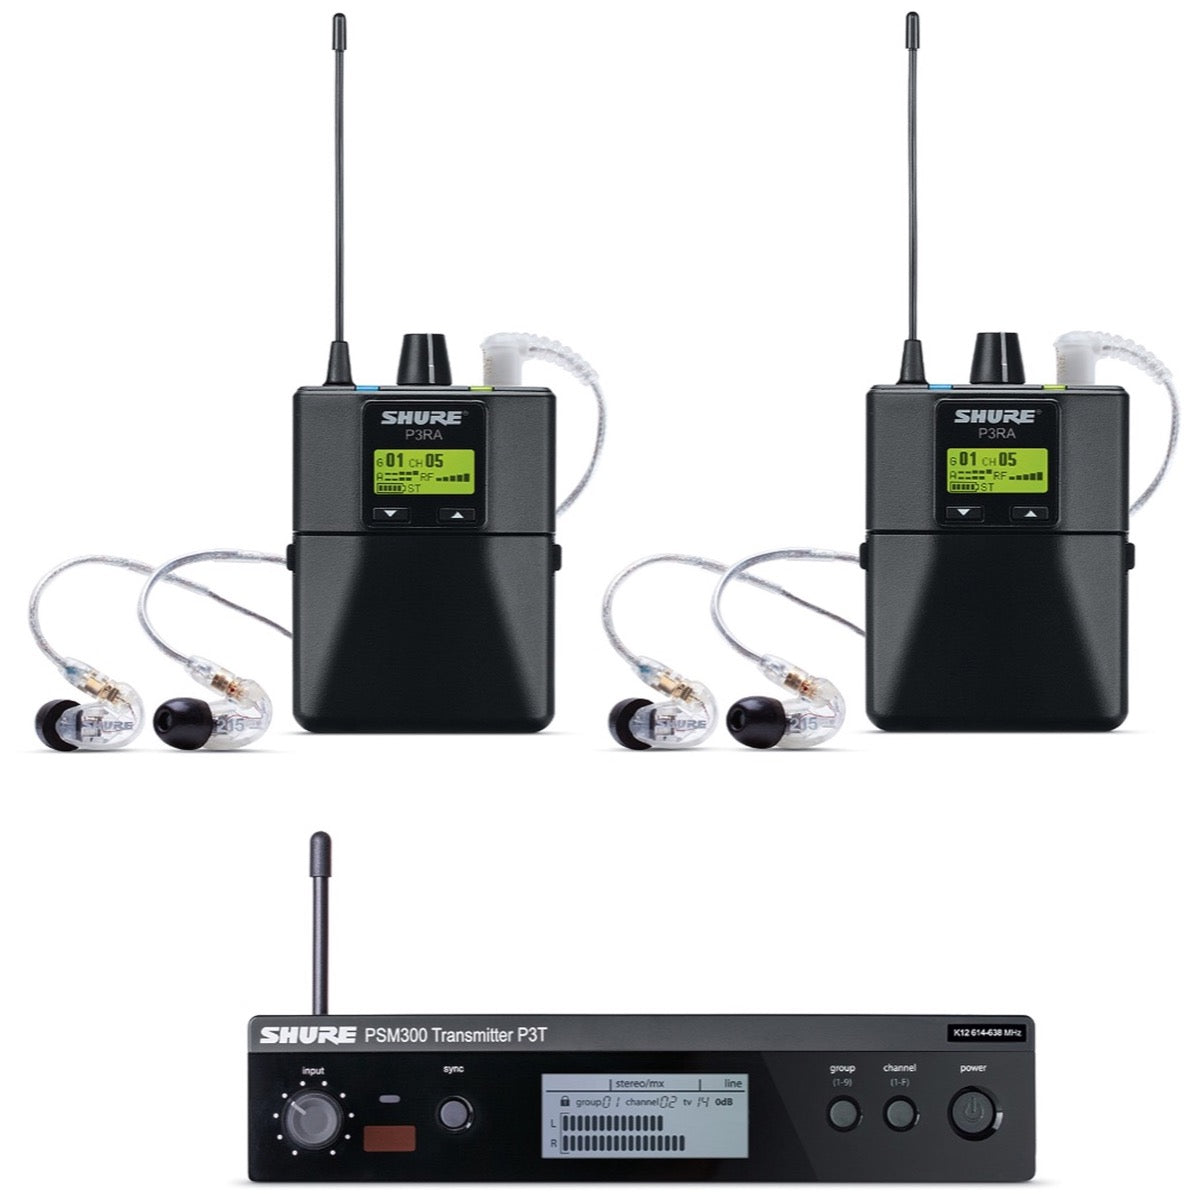 Shure PSM 300 Twin Pack PRO Wireless In-Ear Monitor IEM System with SE215 Earphones, Band H20 (518.200 - 541.800 MHz)